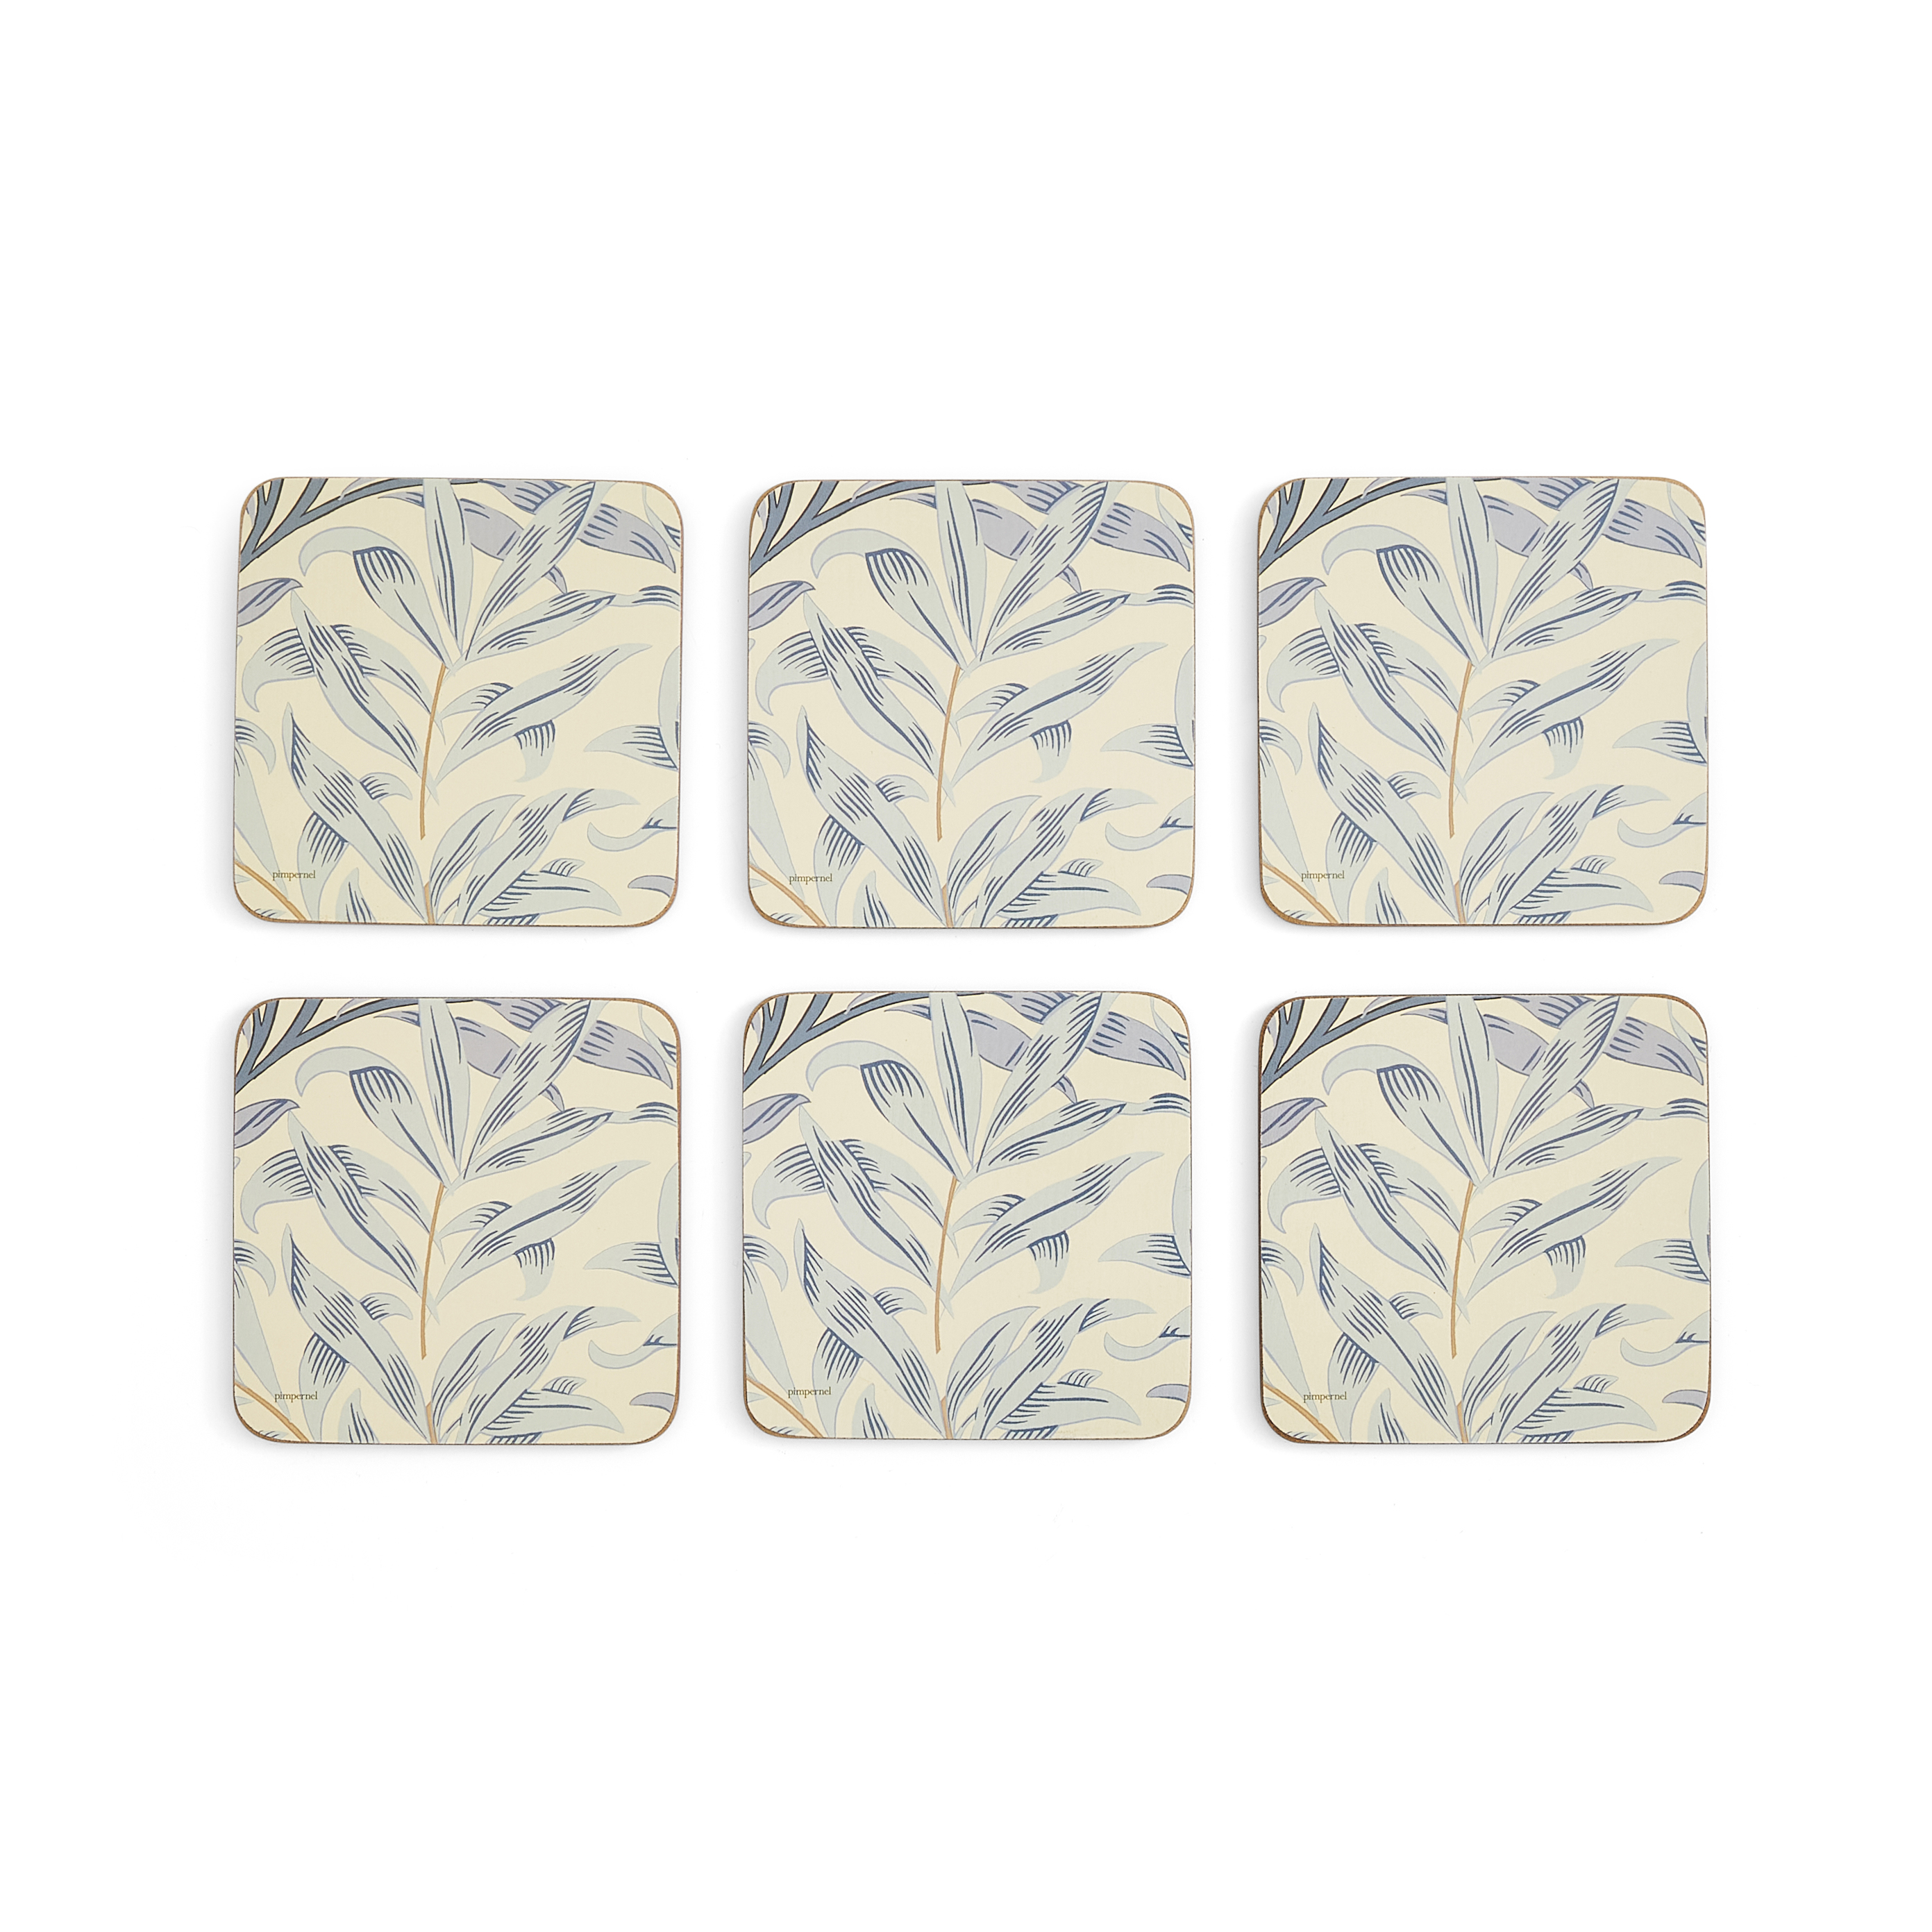 Morris & Co Willow Bough 6 Coasters, Blue image number null